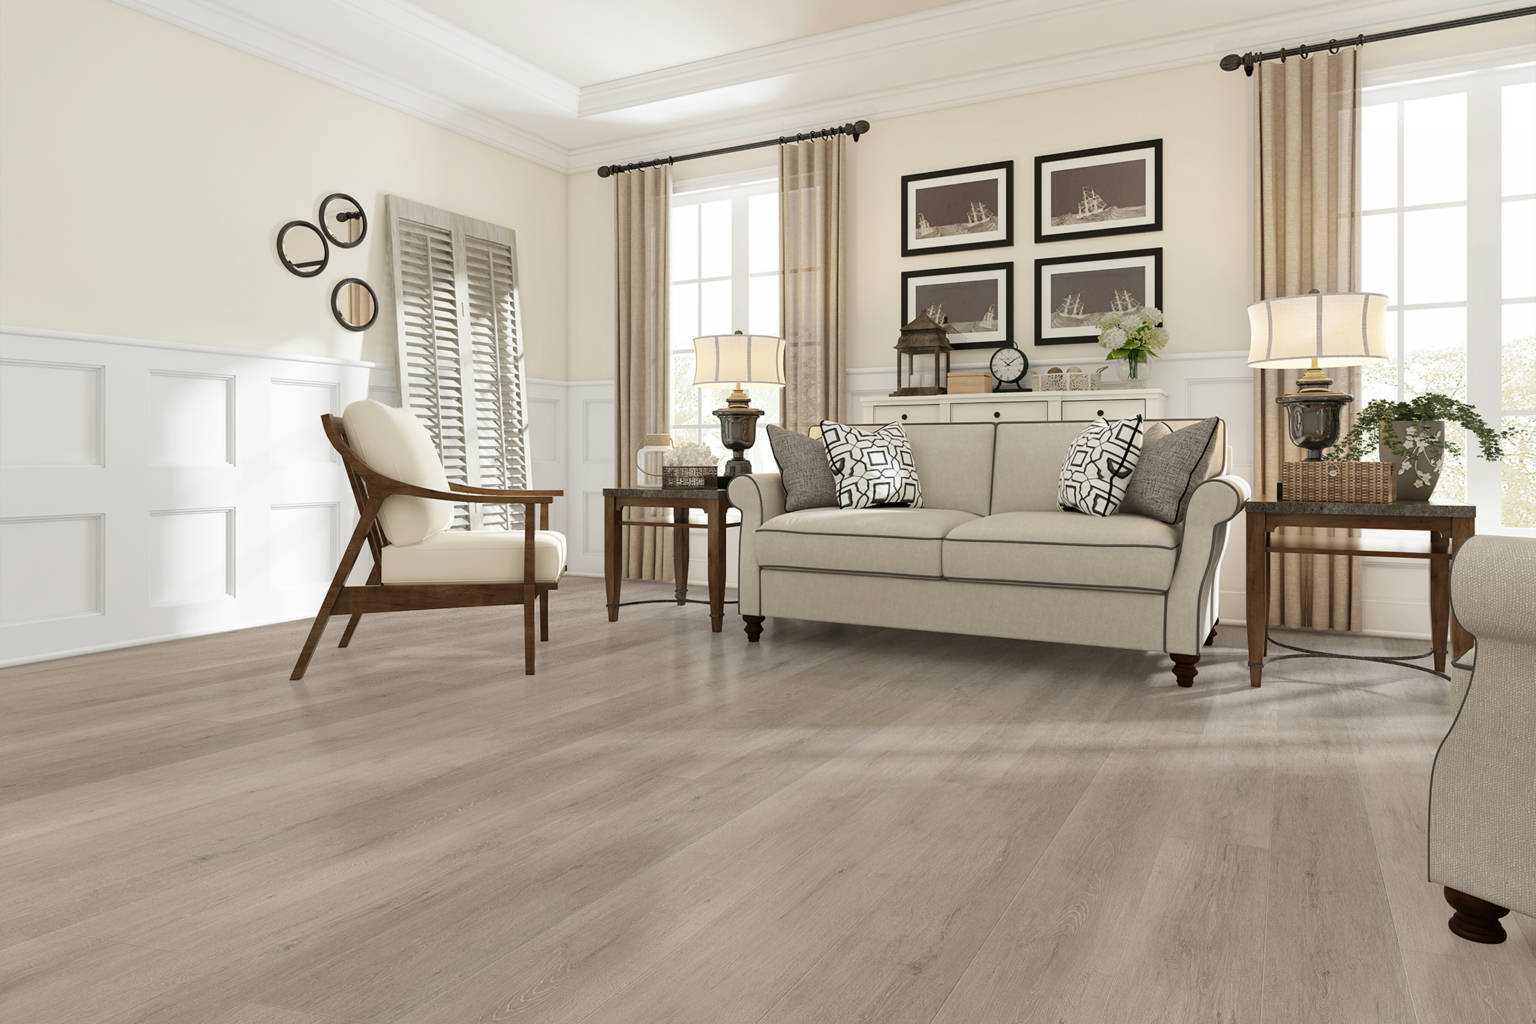 Timber Ridge Gold 12 0 | Qualis Ceramica | Luxury Tile and Vinyl at affordable prices